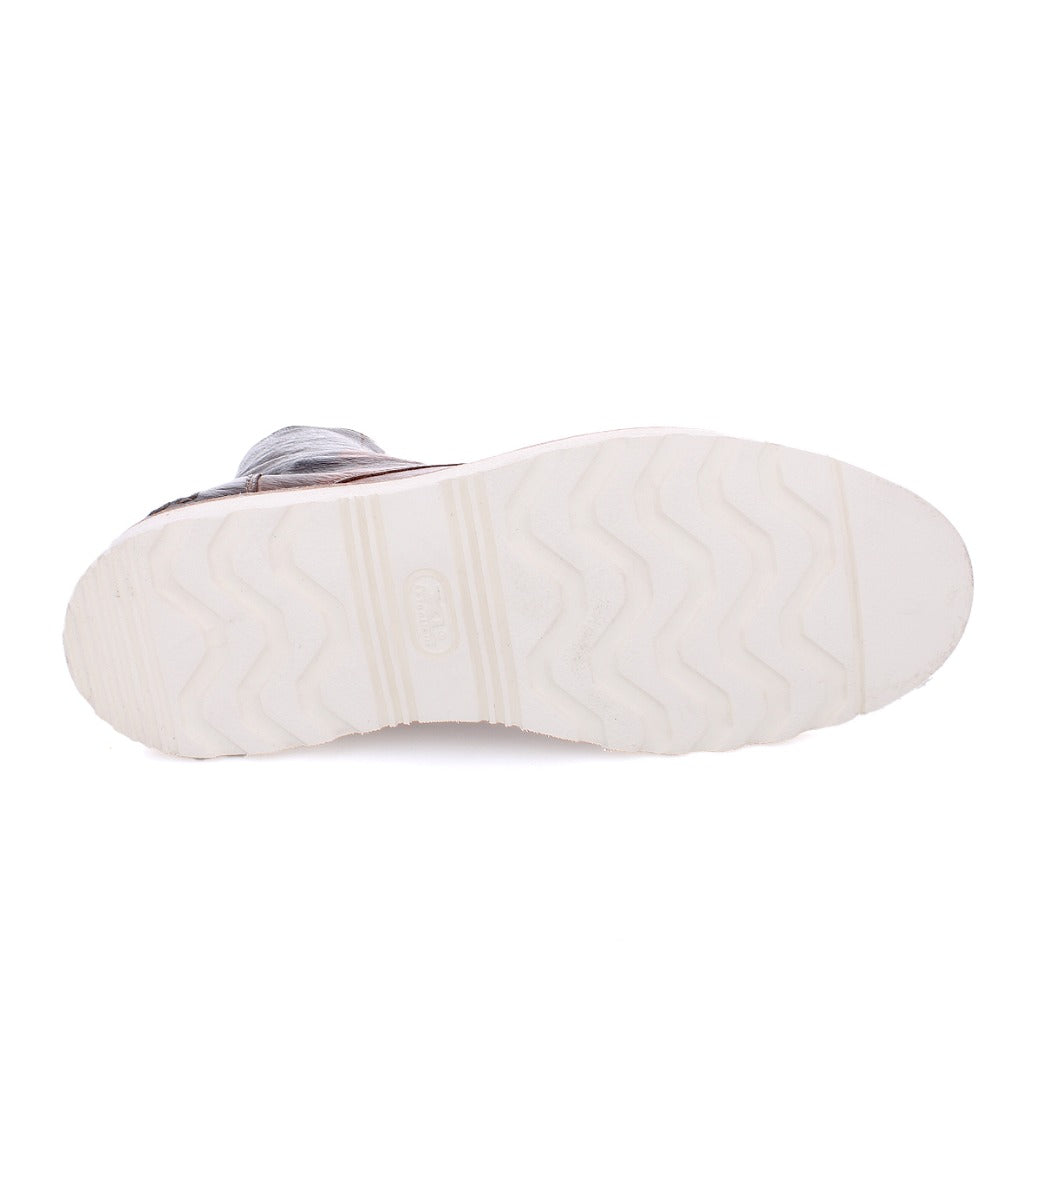 The sole of a Protege Light sneaker by Bed Stu, with wavy tread patterns and a visible brand logo, featuring cushioned leather insoles.